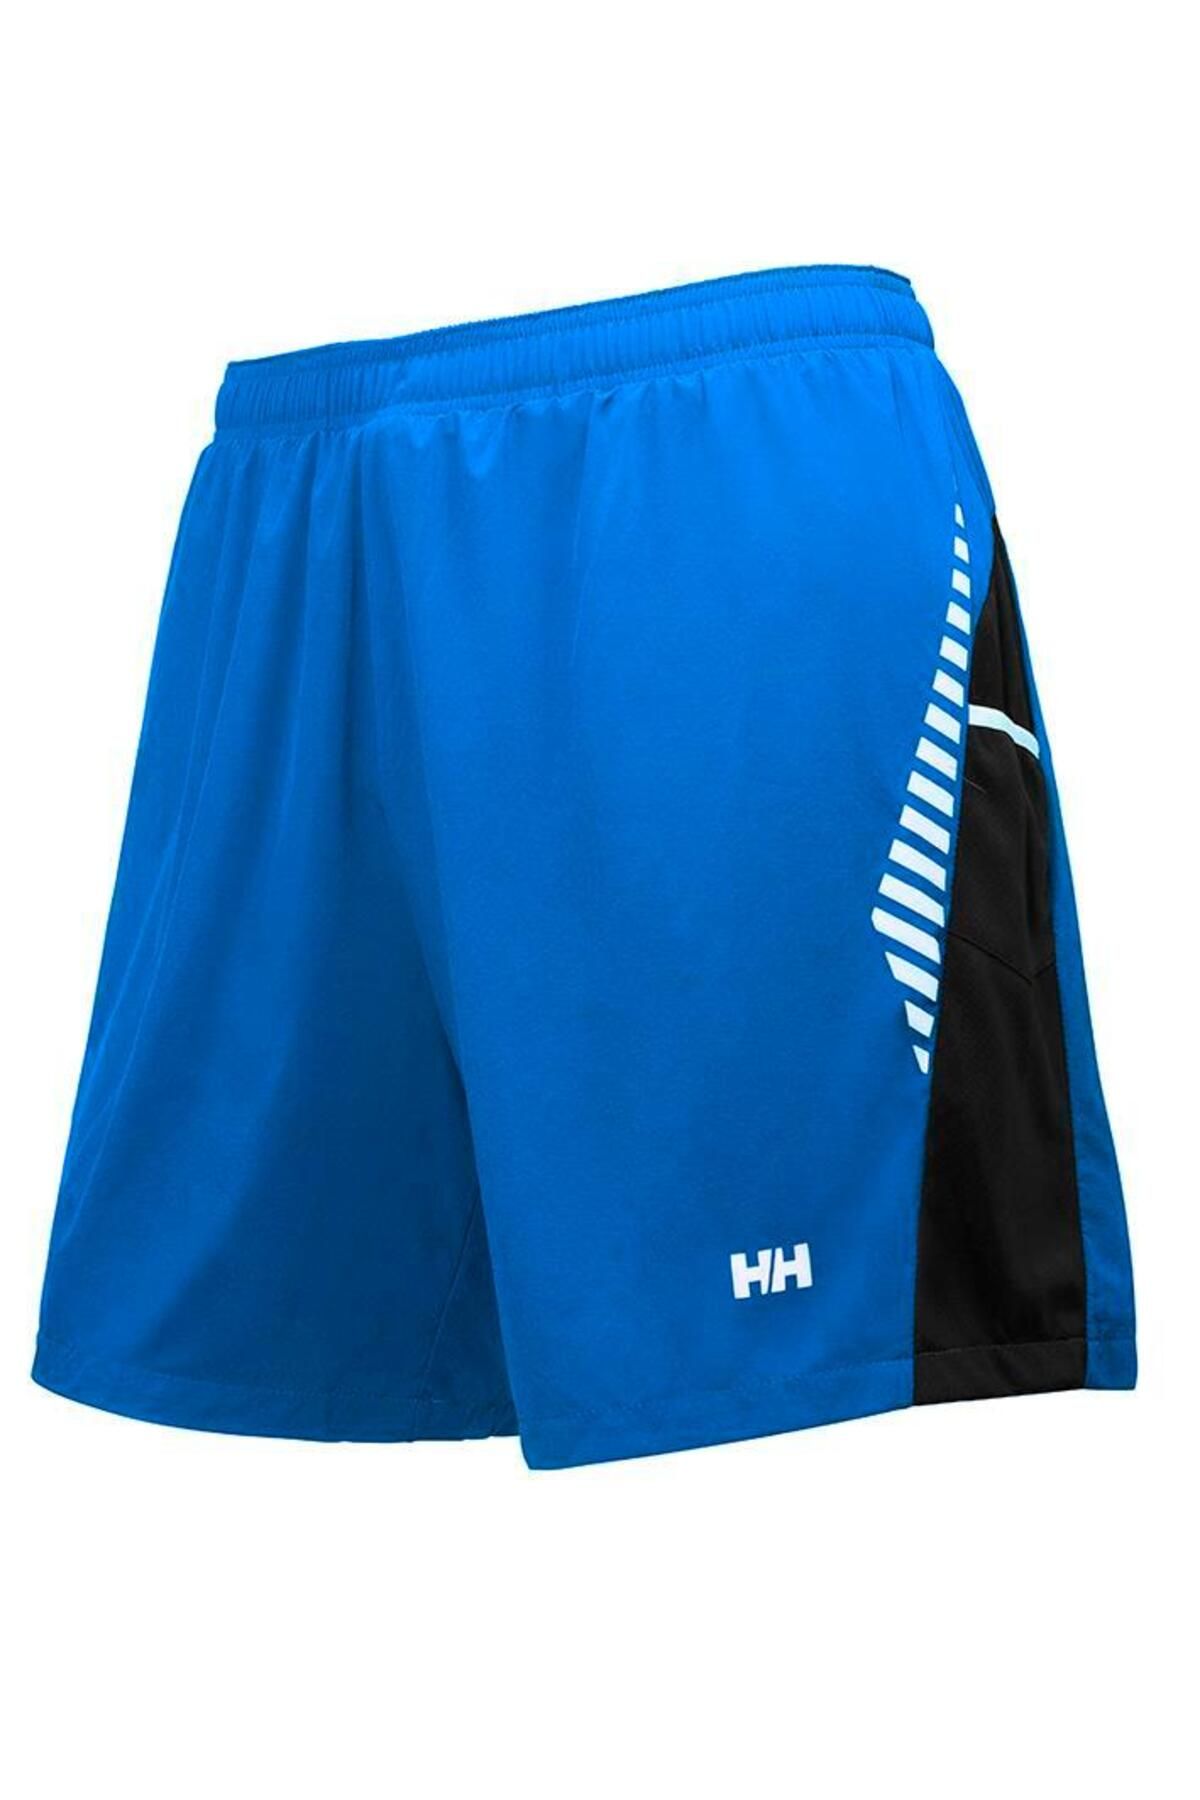 Helly Hansen Pace 2-in-1 Distance Shorts 7